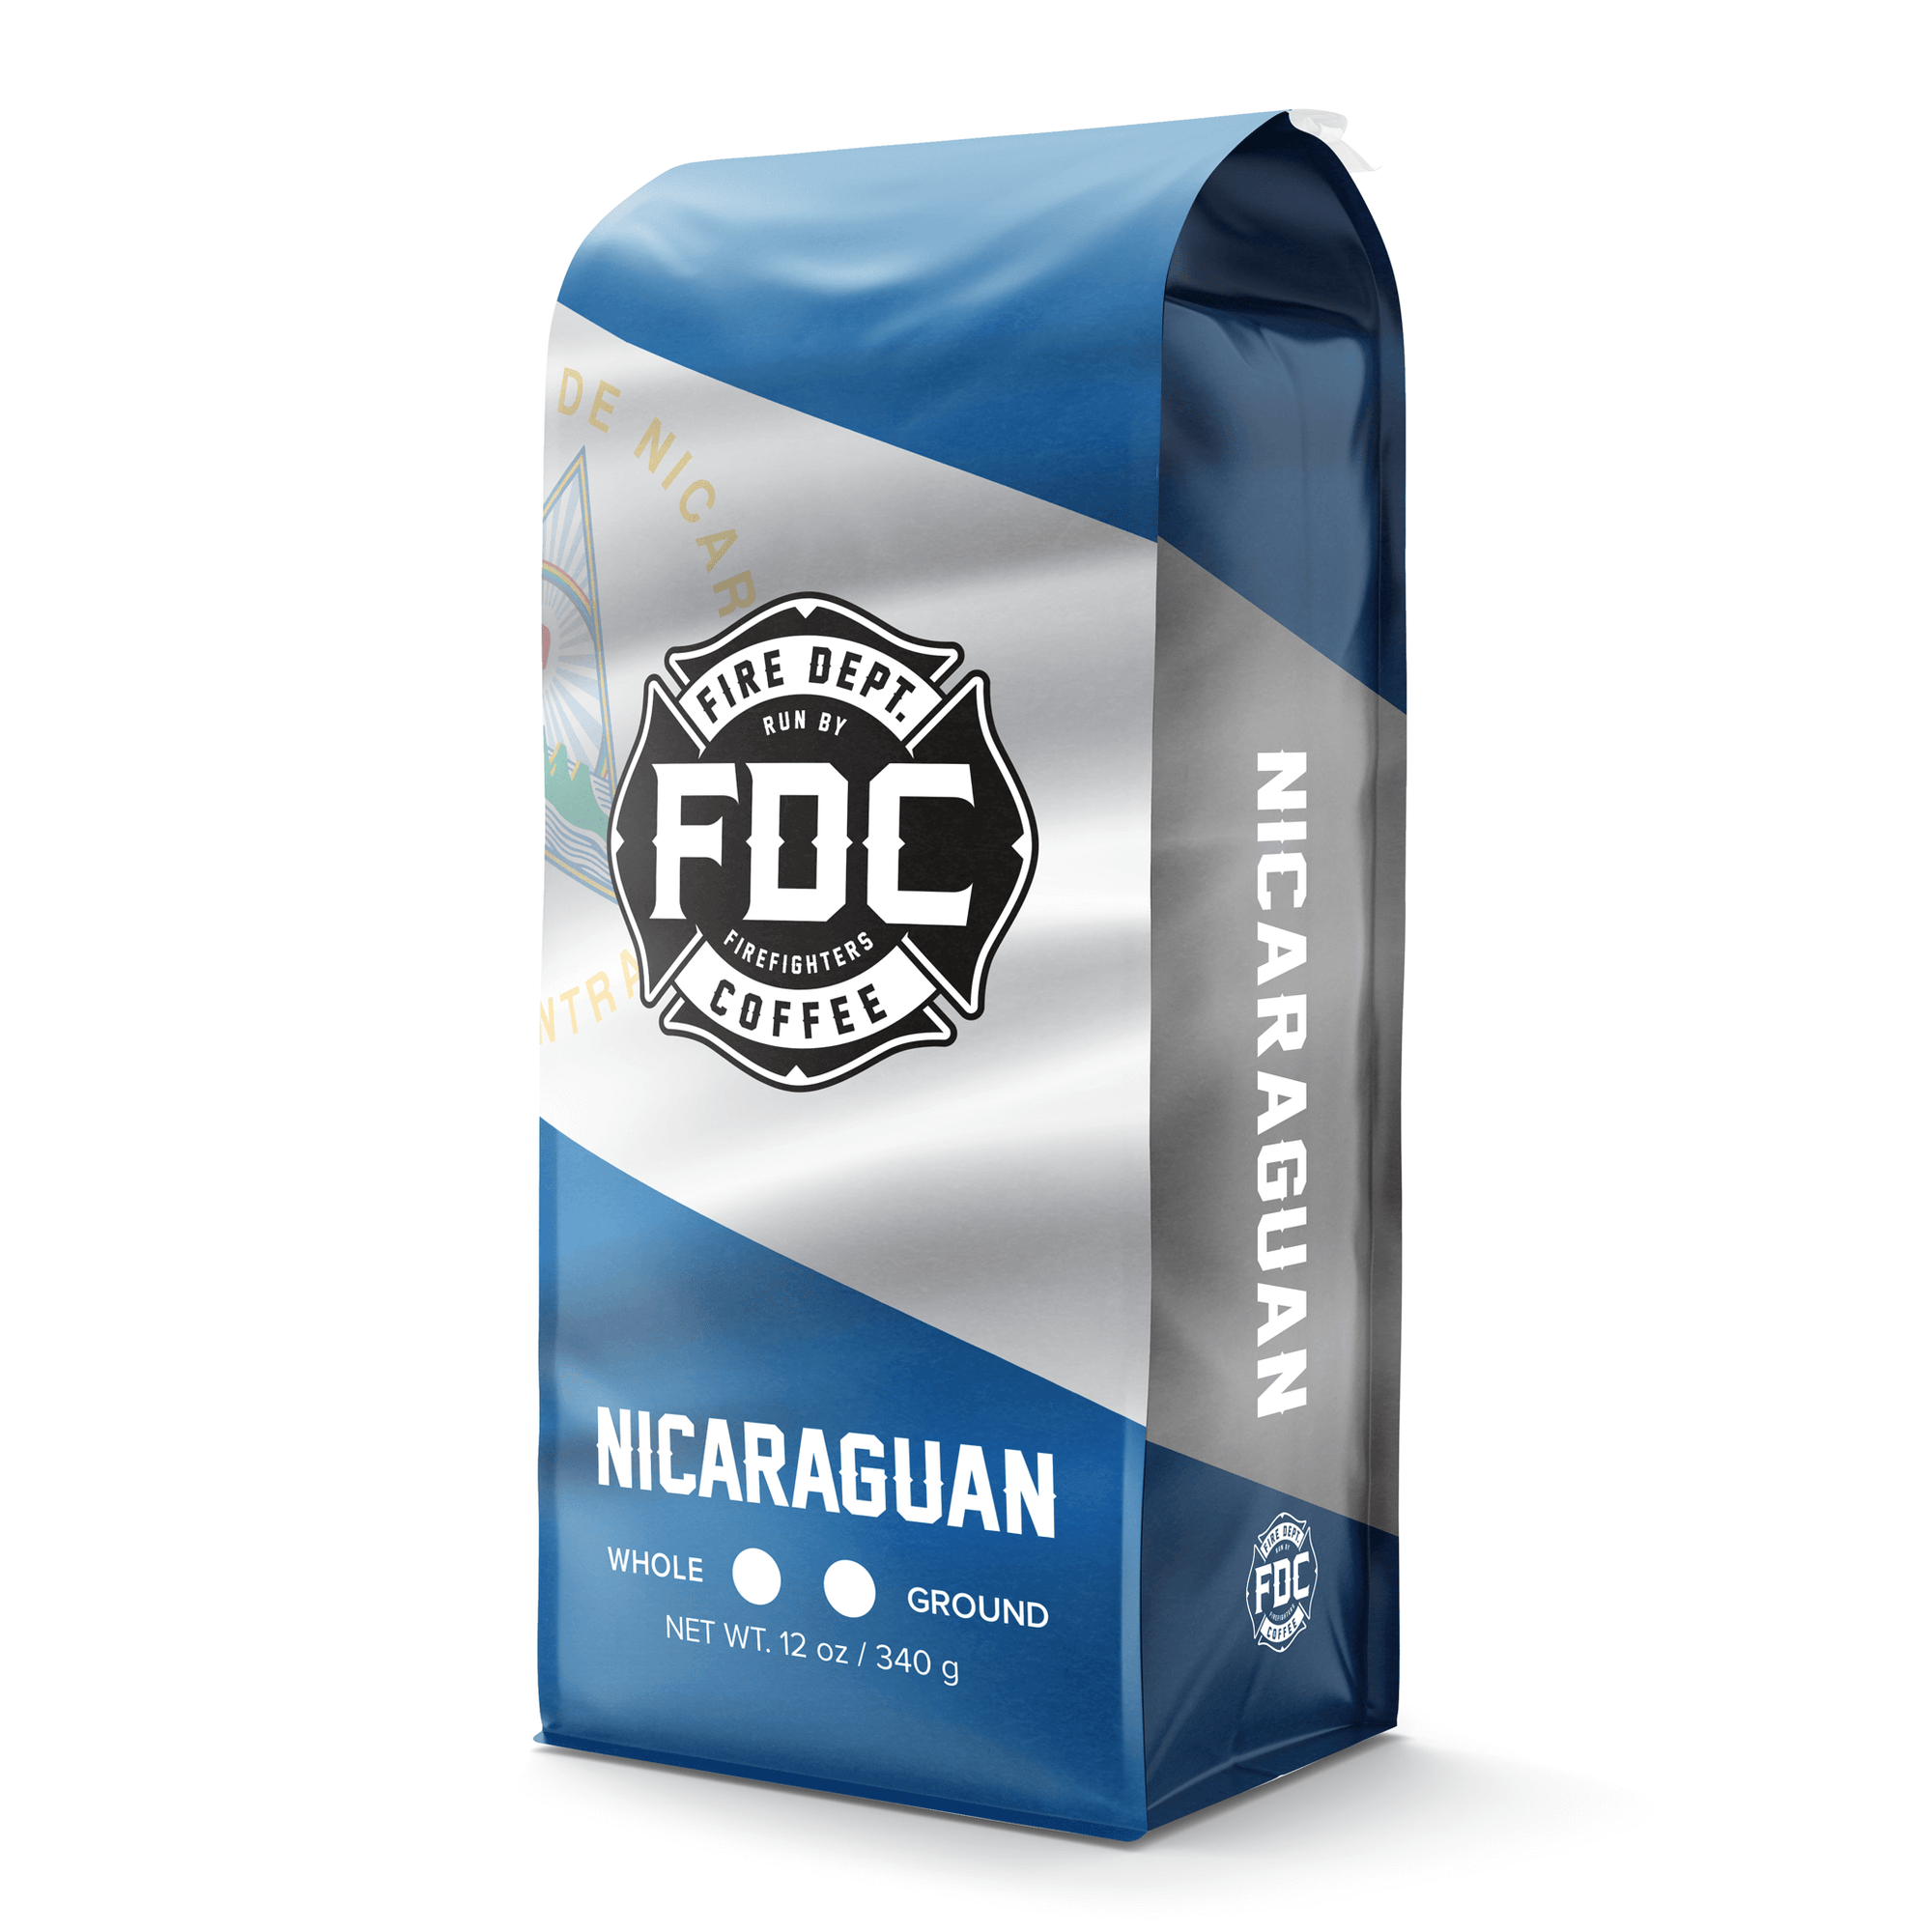 Fire Dept. Coffee's 12 ounce Nicaraguan Coffee in a rectangular package